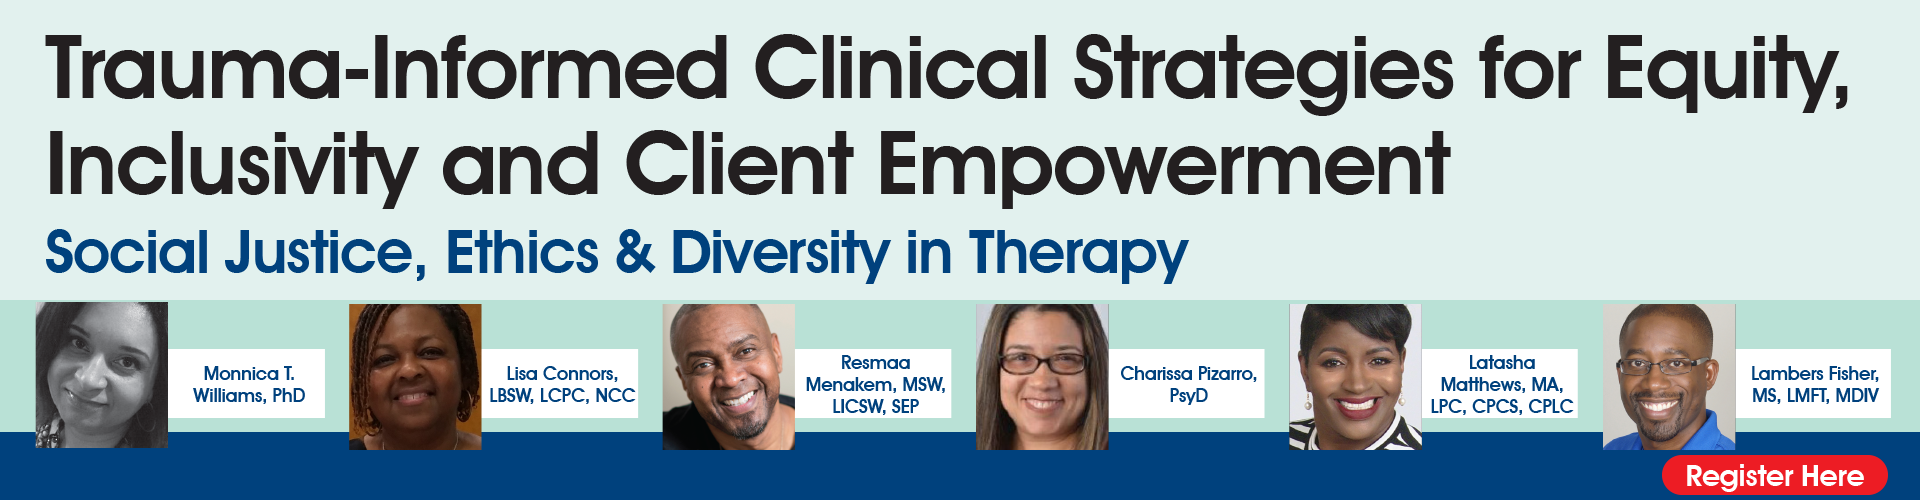 Trauma-Informed Clinical Strategies for Equity, Inclusivity and Client Empowerment: Social Justice, Ethics & Diversity in Therapy